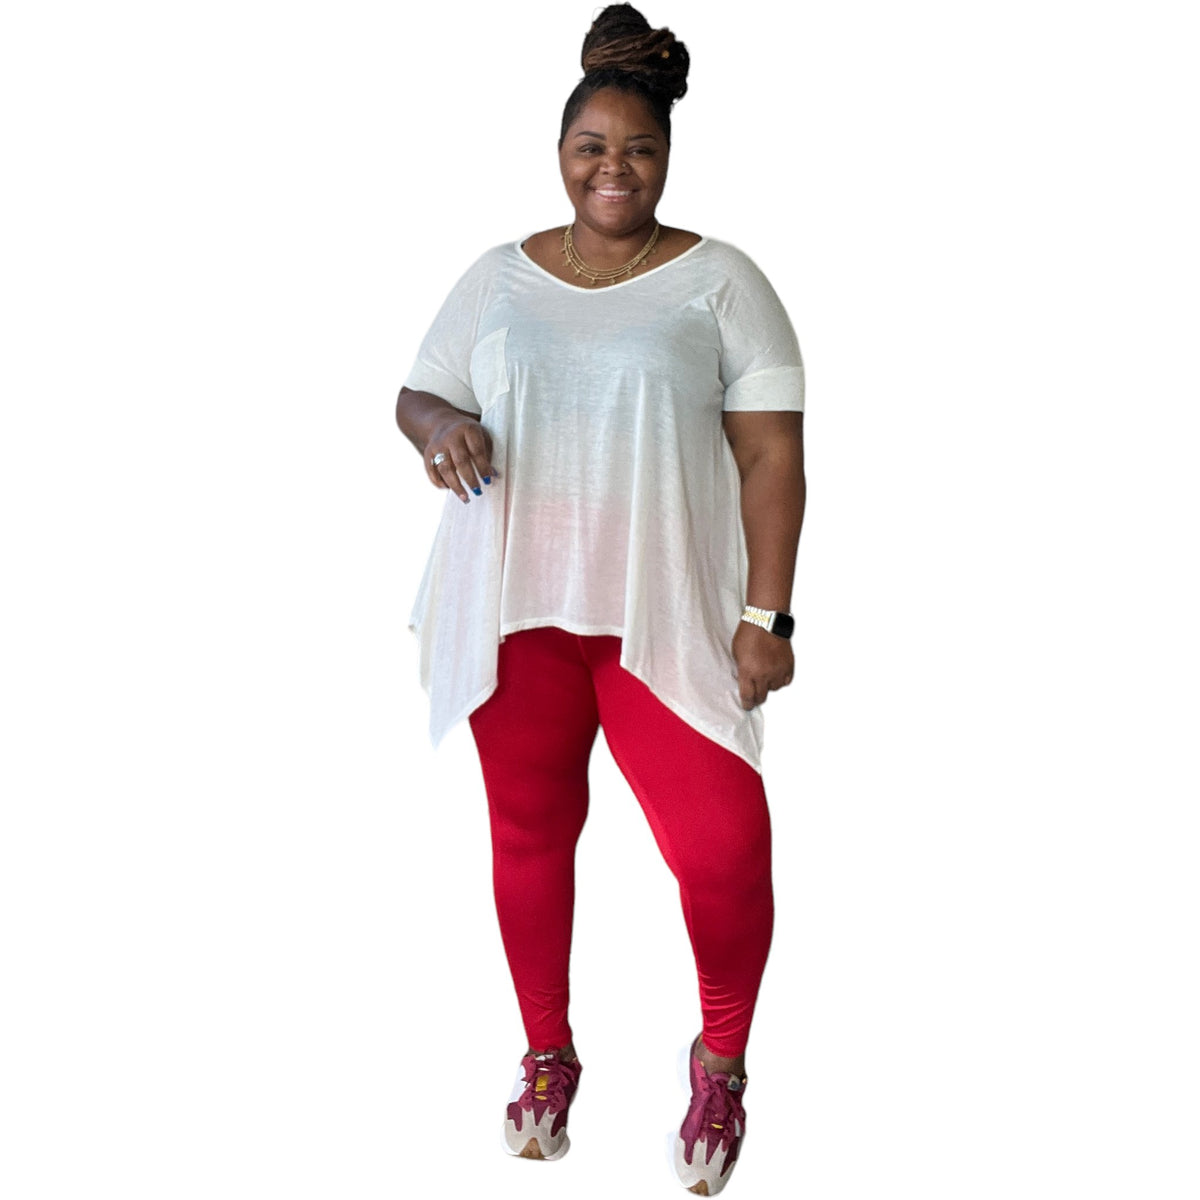 Plus Size Women's Red Compression Leggings - Fabulously Dressed